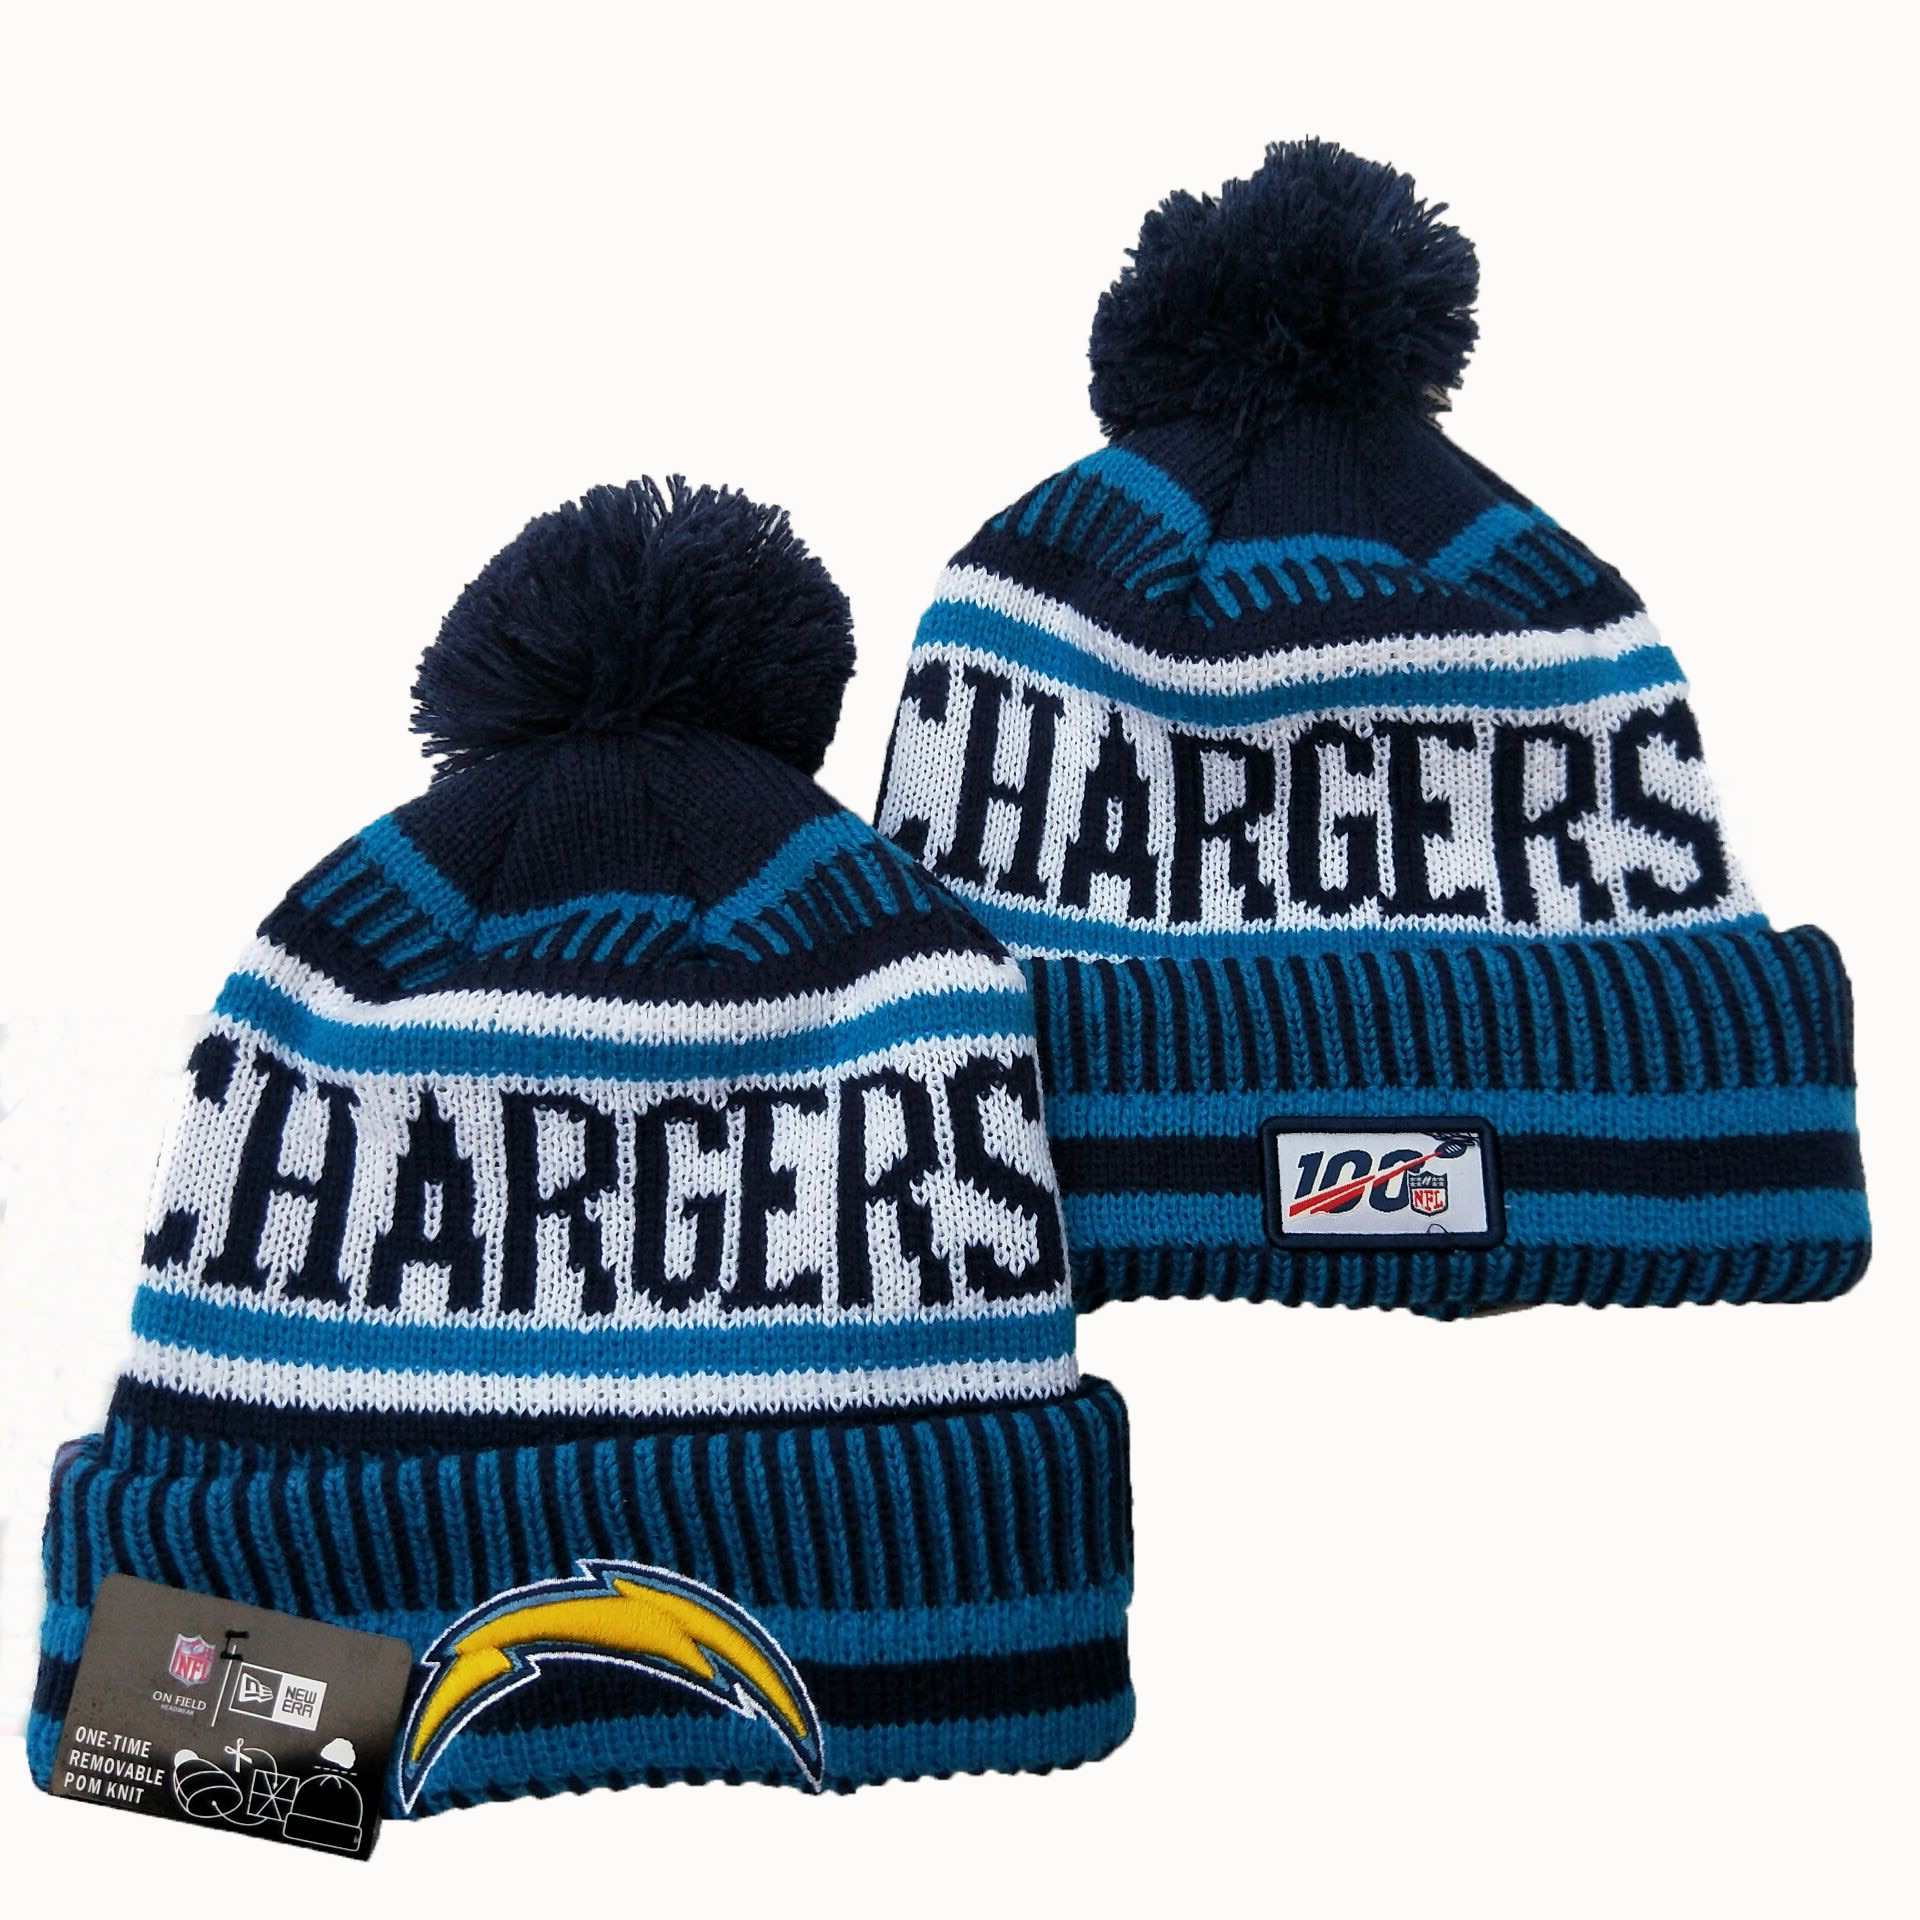 Los Angeles Chargers Knit Hats 032